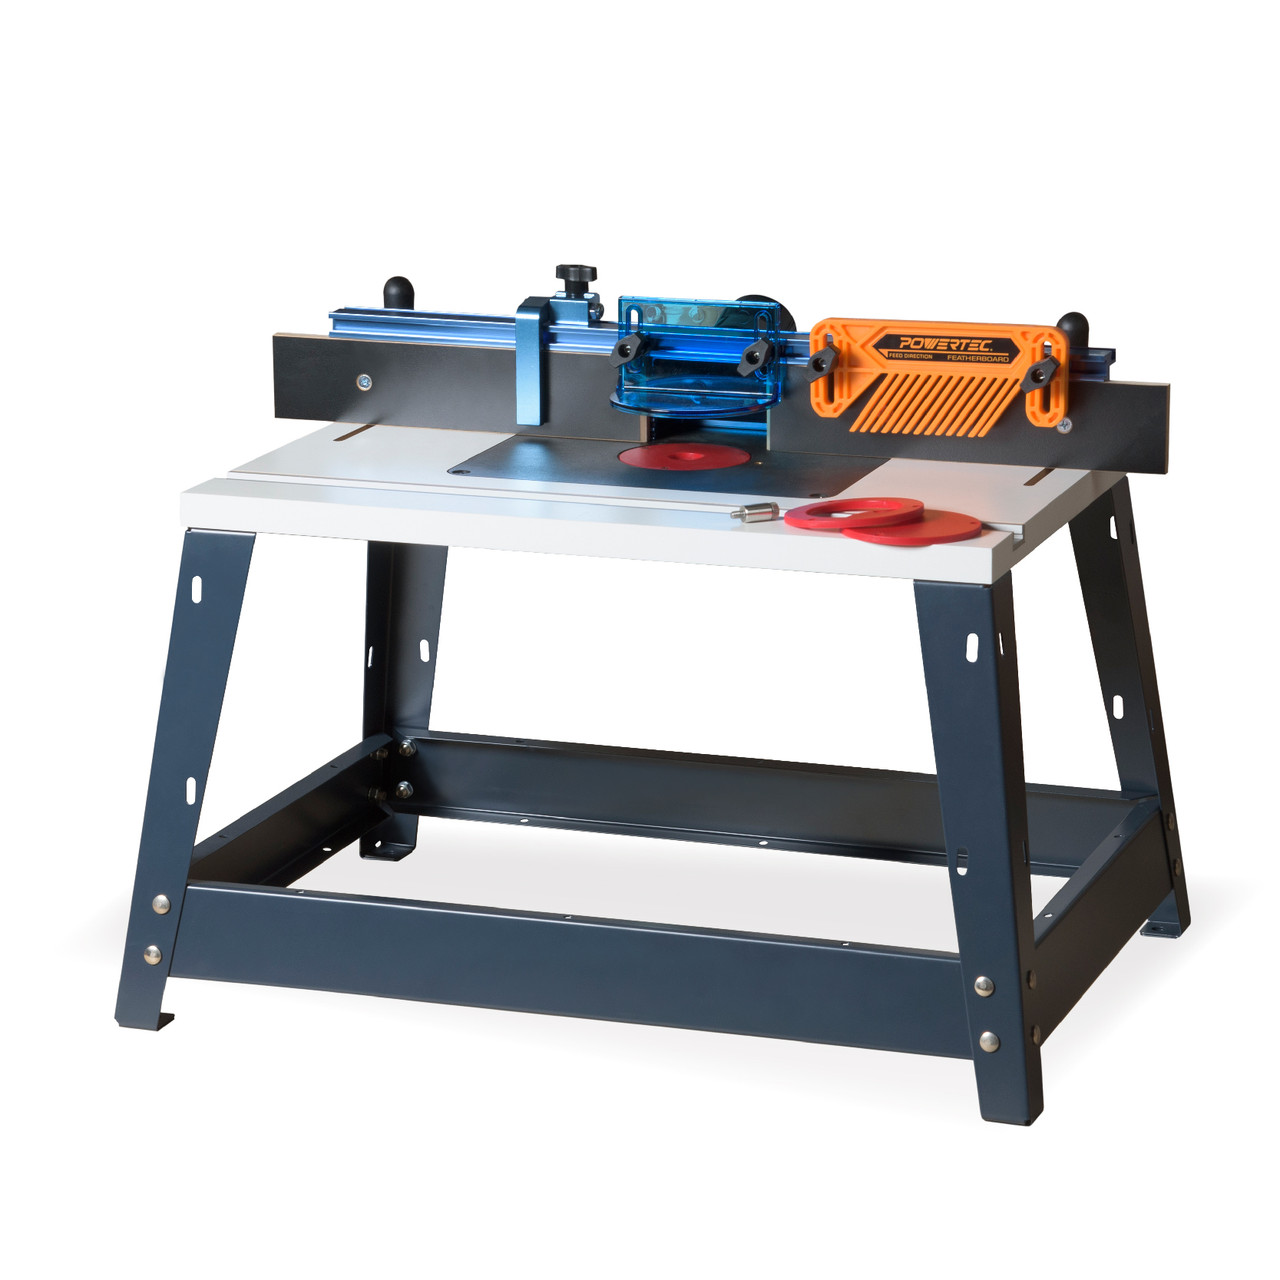 71402 Bench Top Router Table and Fence Set